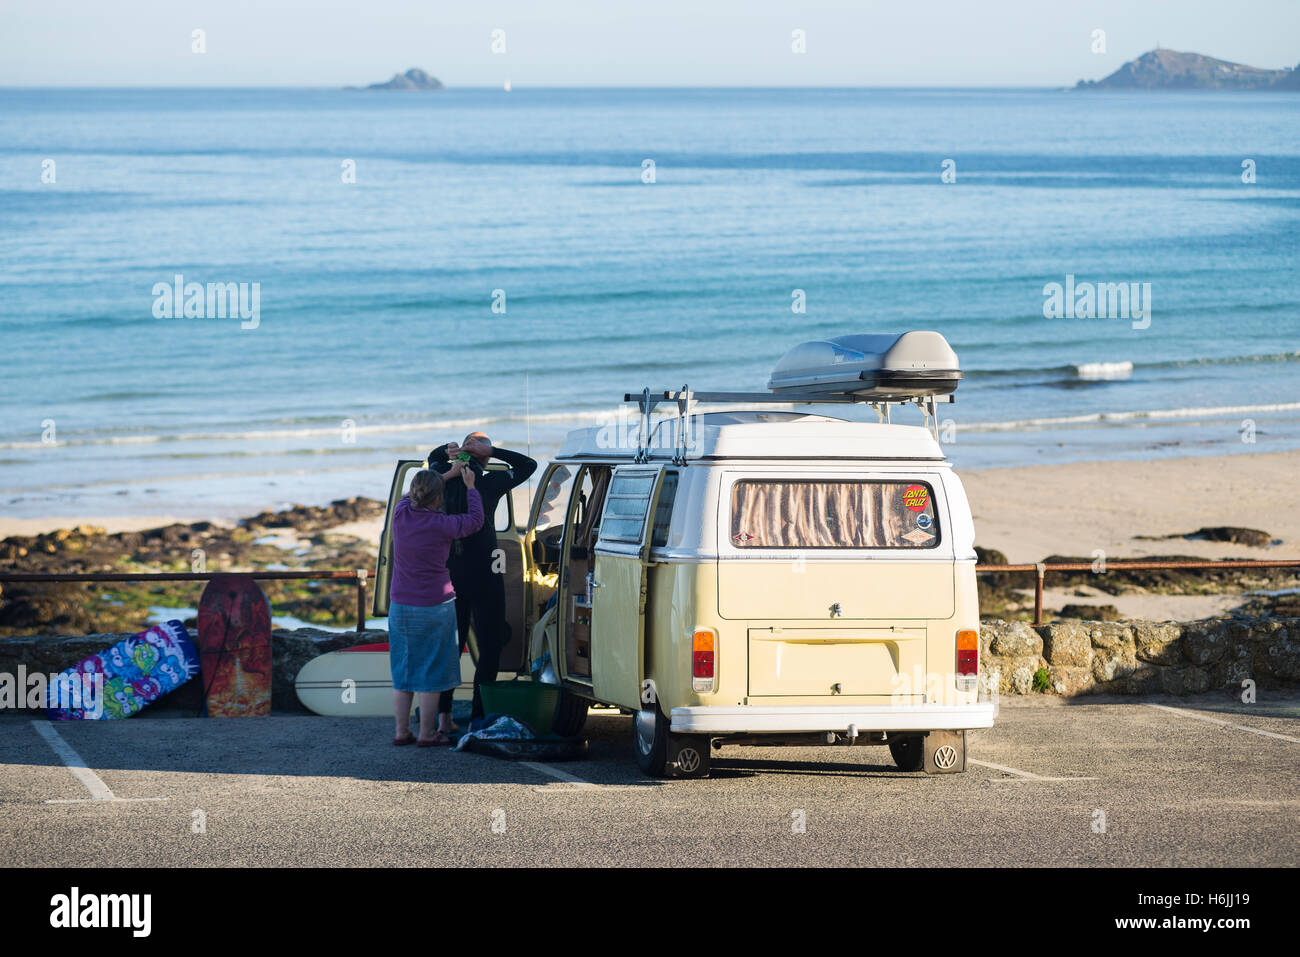 Surfers at a vintage Volkswagen camping bus preparing a wetsuit for a morning surf at Sennen Cove at early morning, Cornwall, UK Stock Photo